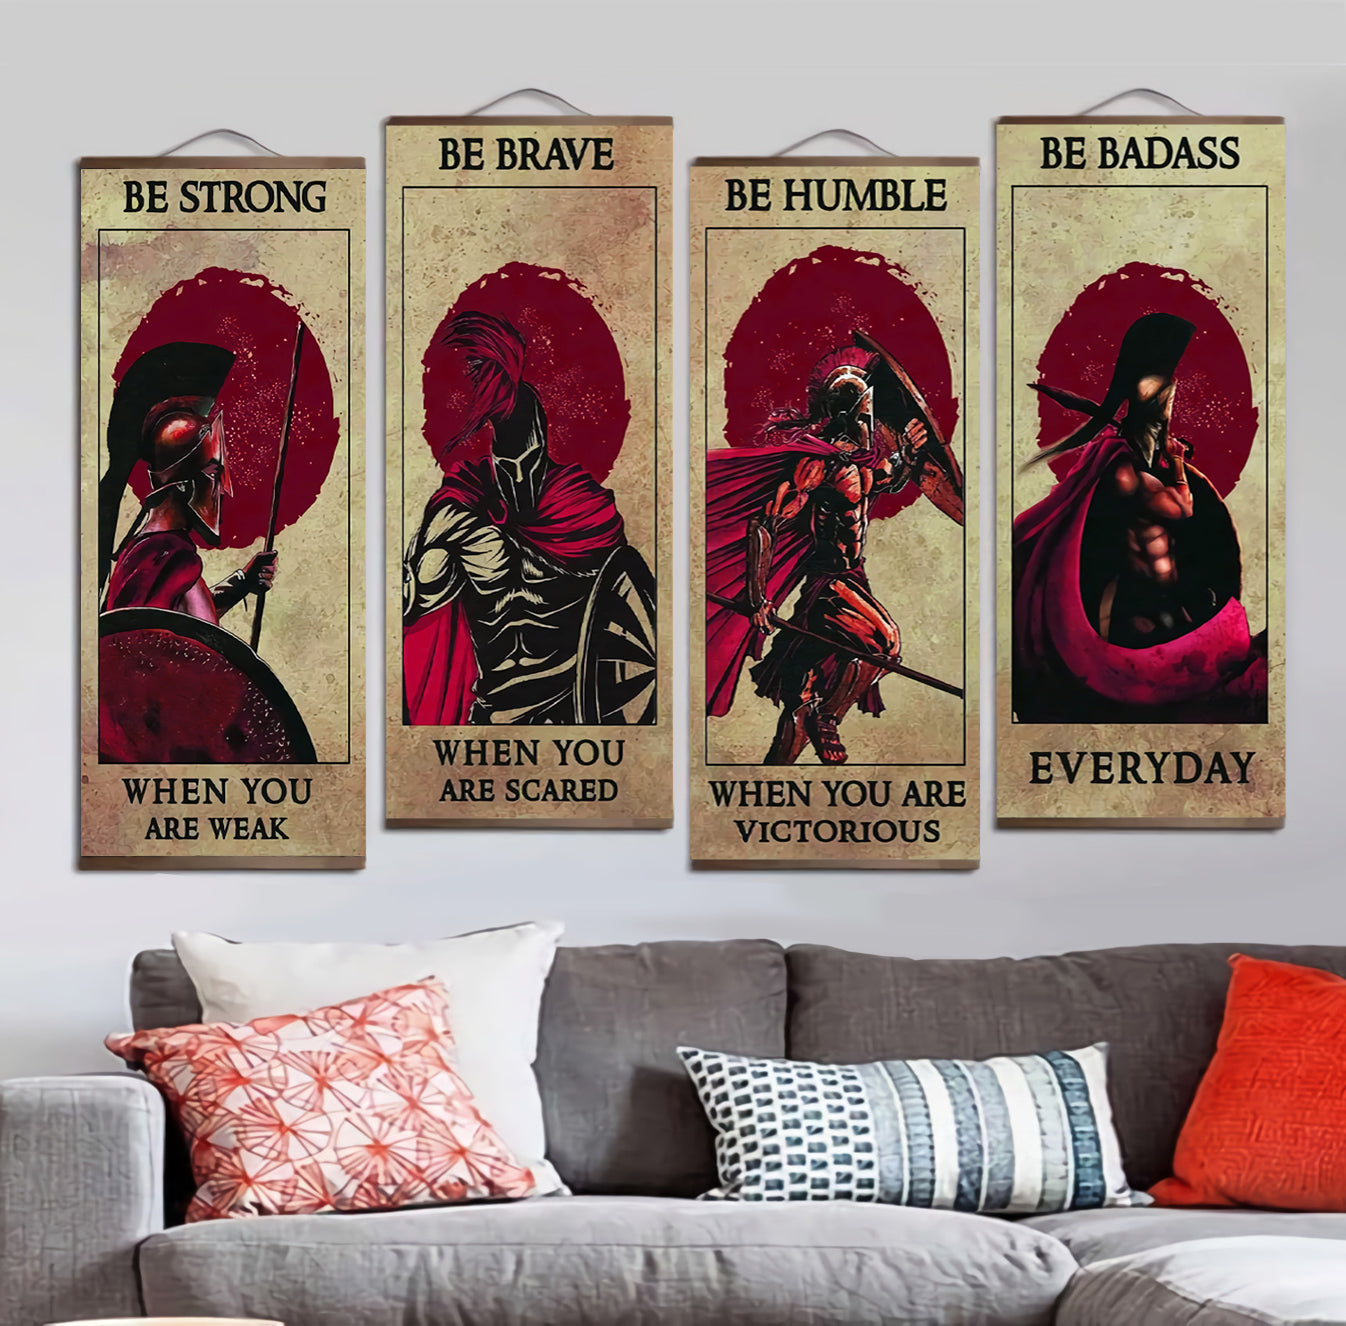 Spartan Samurai hanging canvas be strong be brave